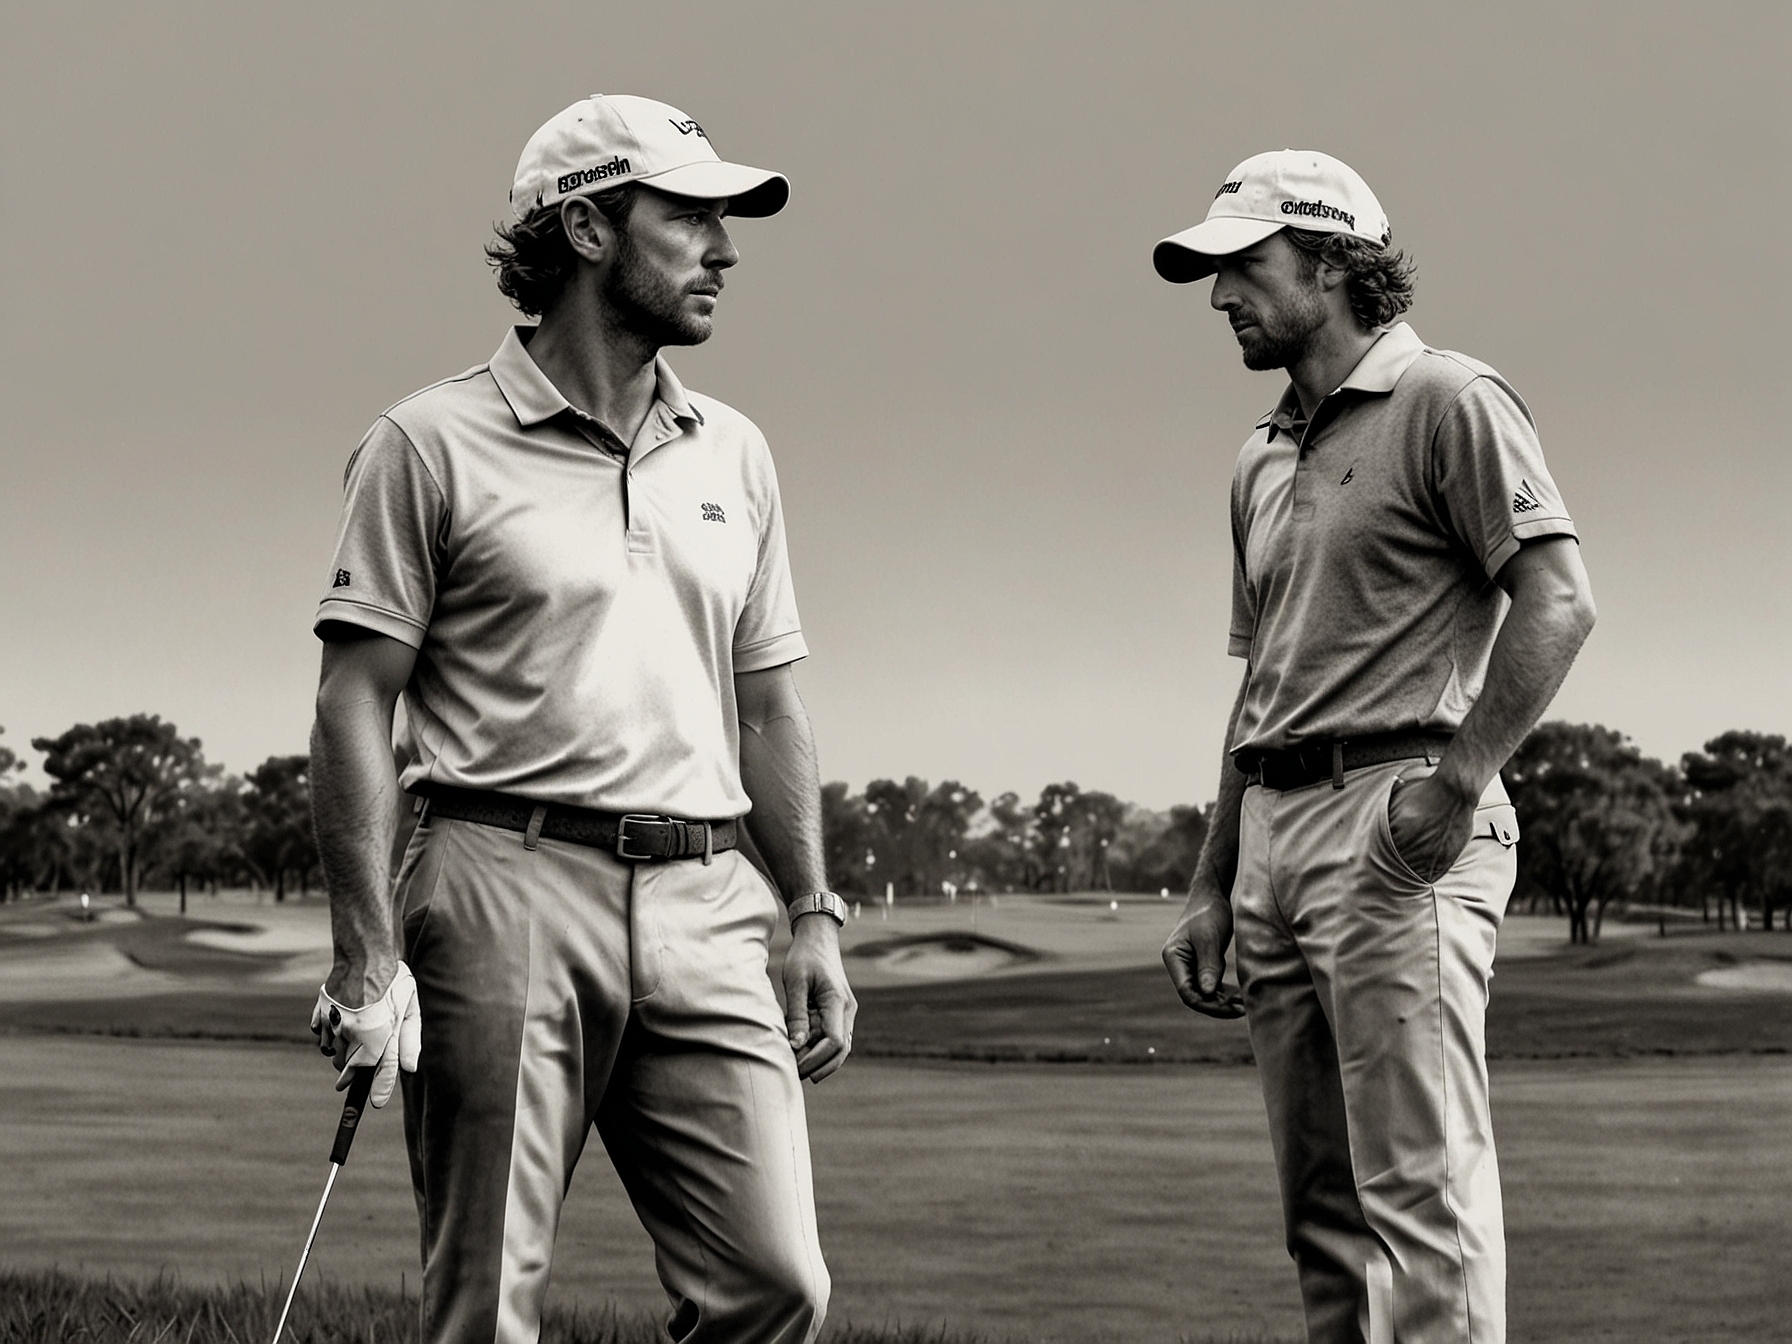 Joost Luiten and Darius Van Driel, dressed in golfing attire, standing dejectedly on a golf course, symbolizing their disappointment over missing the Paris Olympics due to strict selection criteria.